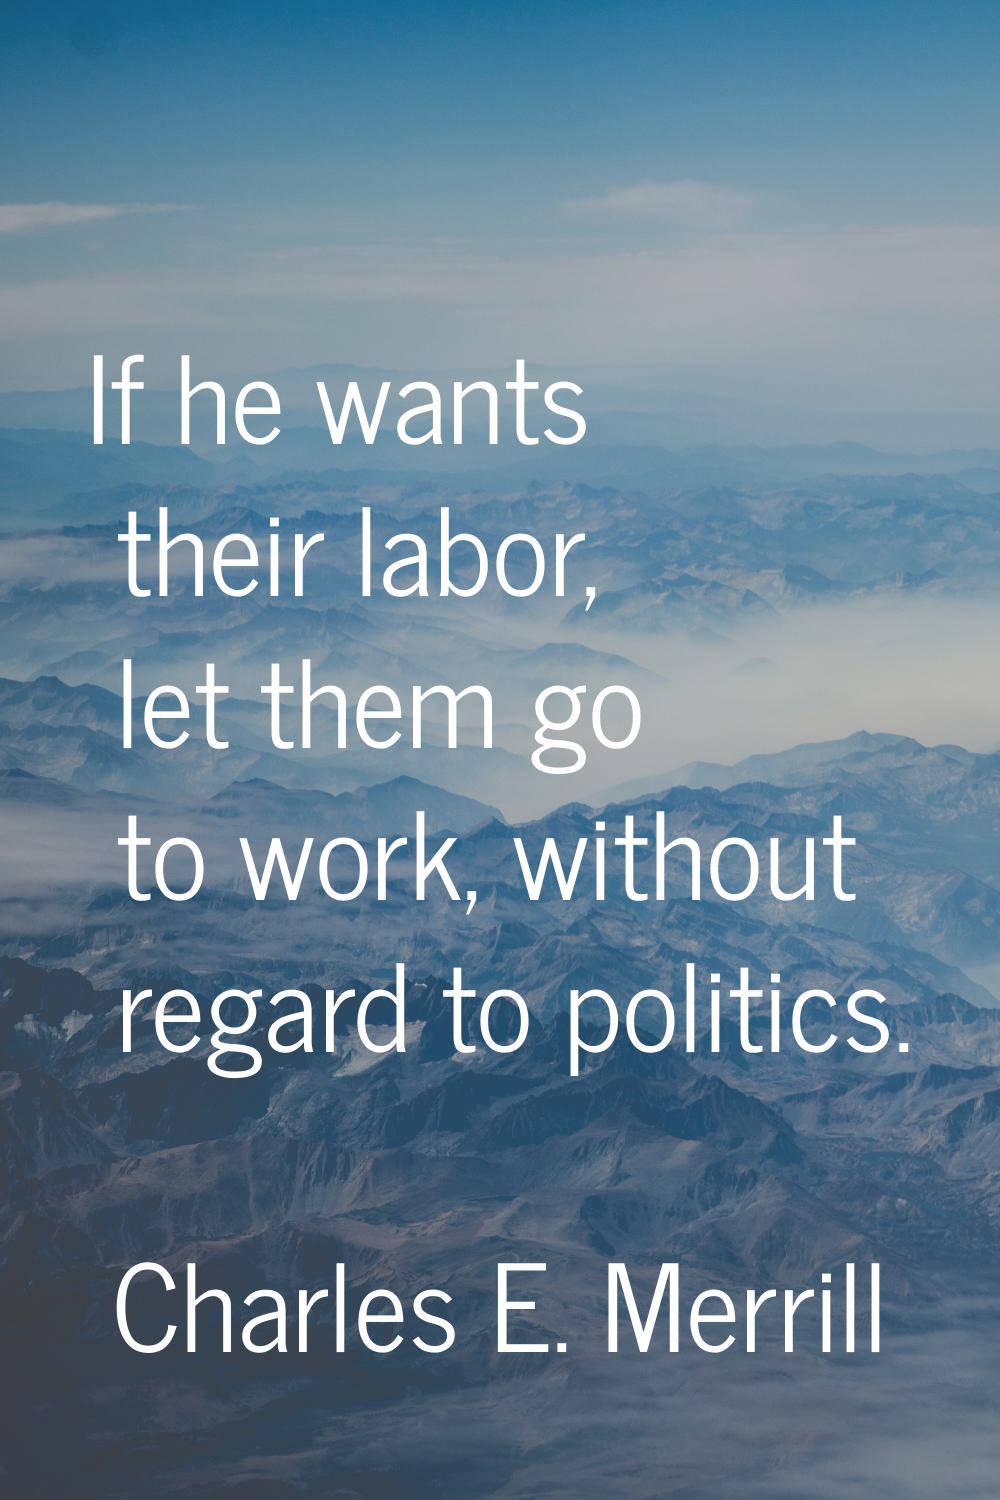 If he wants their labor, let them go to work, without regard to politics.